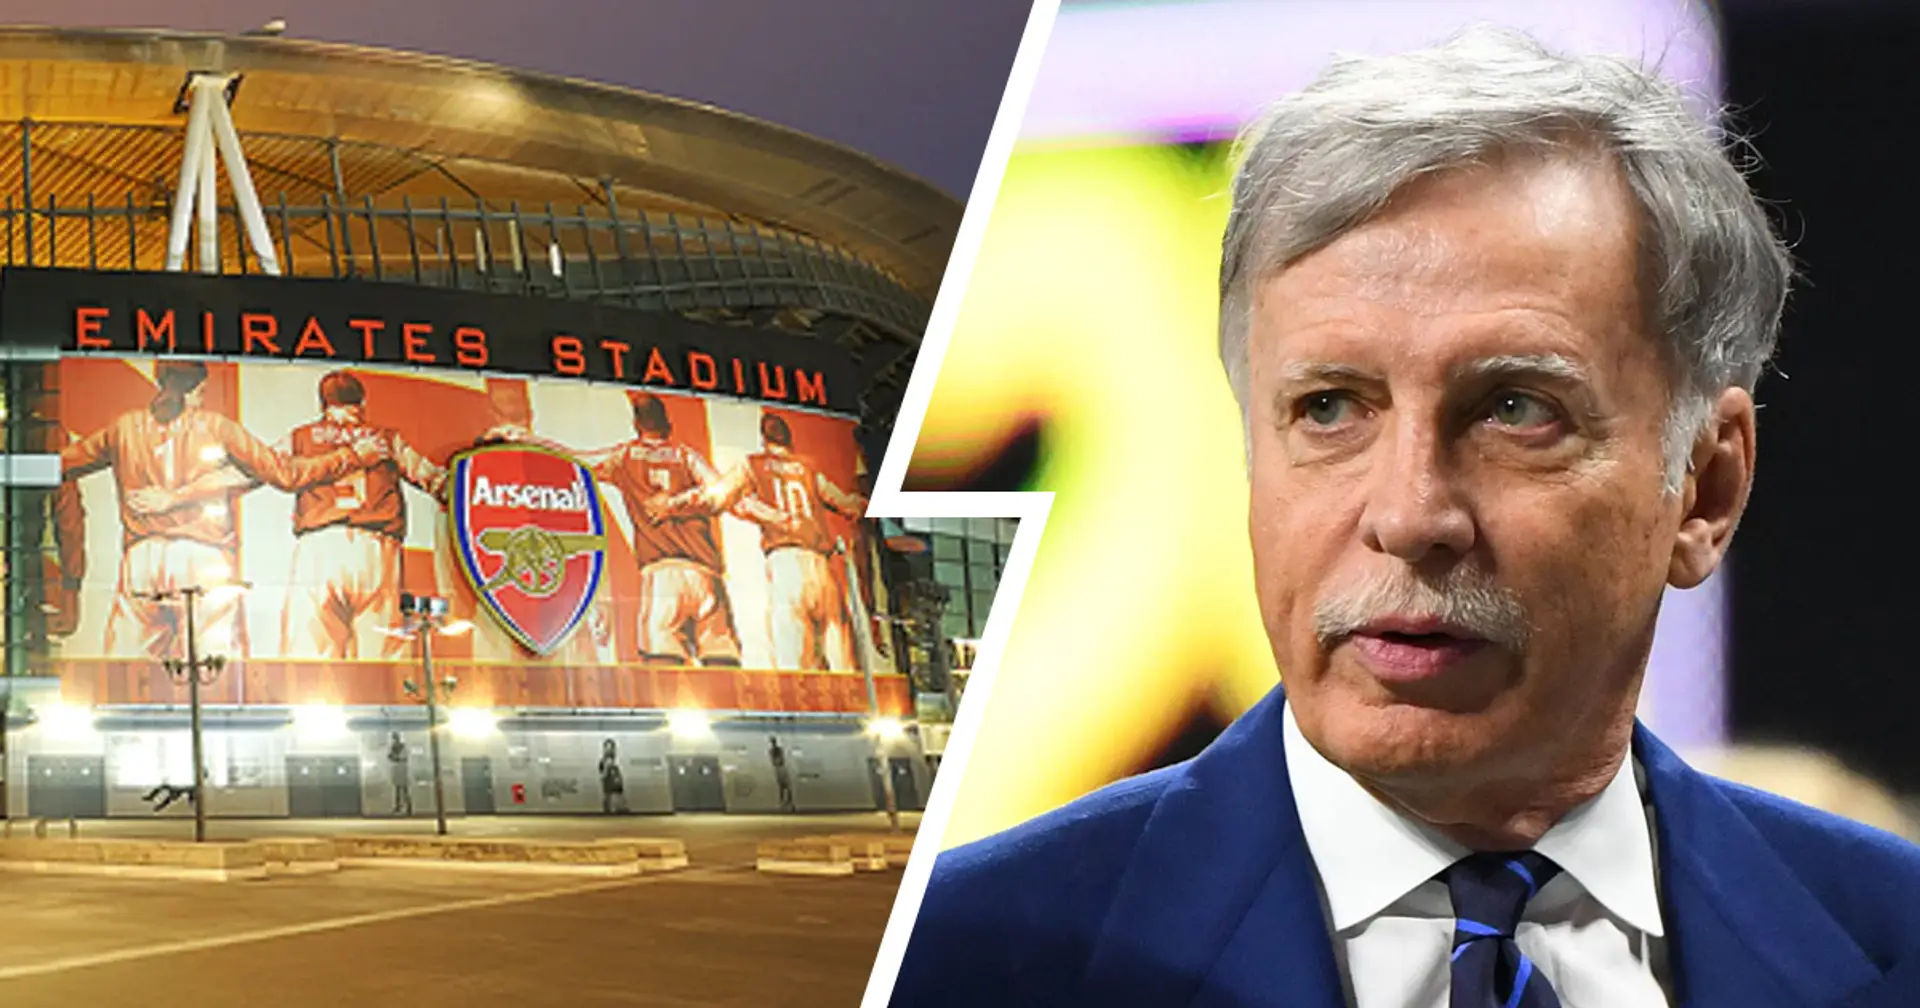 Kroenke pays off Emirates debt but it does not mean Arsenal are Man City now: one-minute explainer